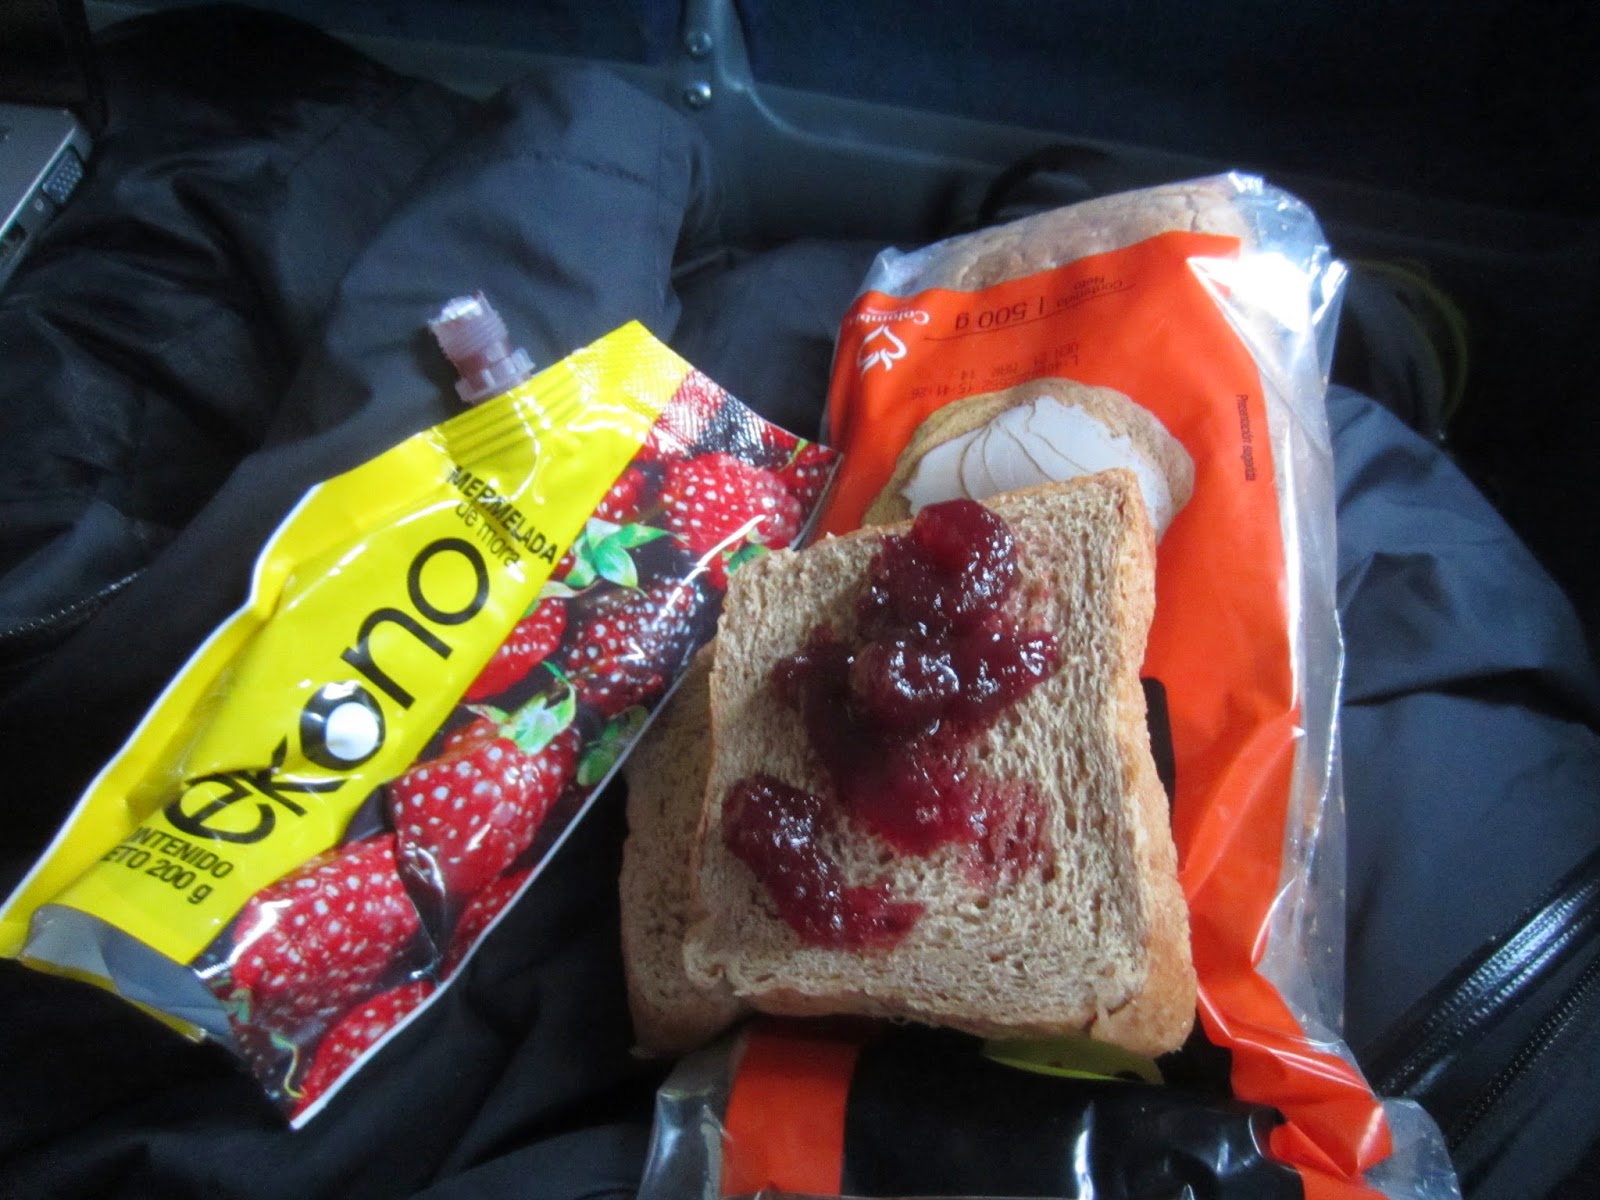 Oh, the life of a backpacker... jam sandwiches for 3 days straight.